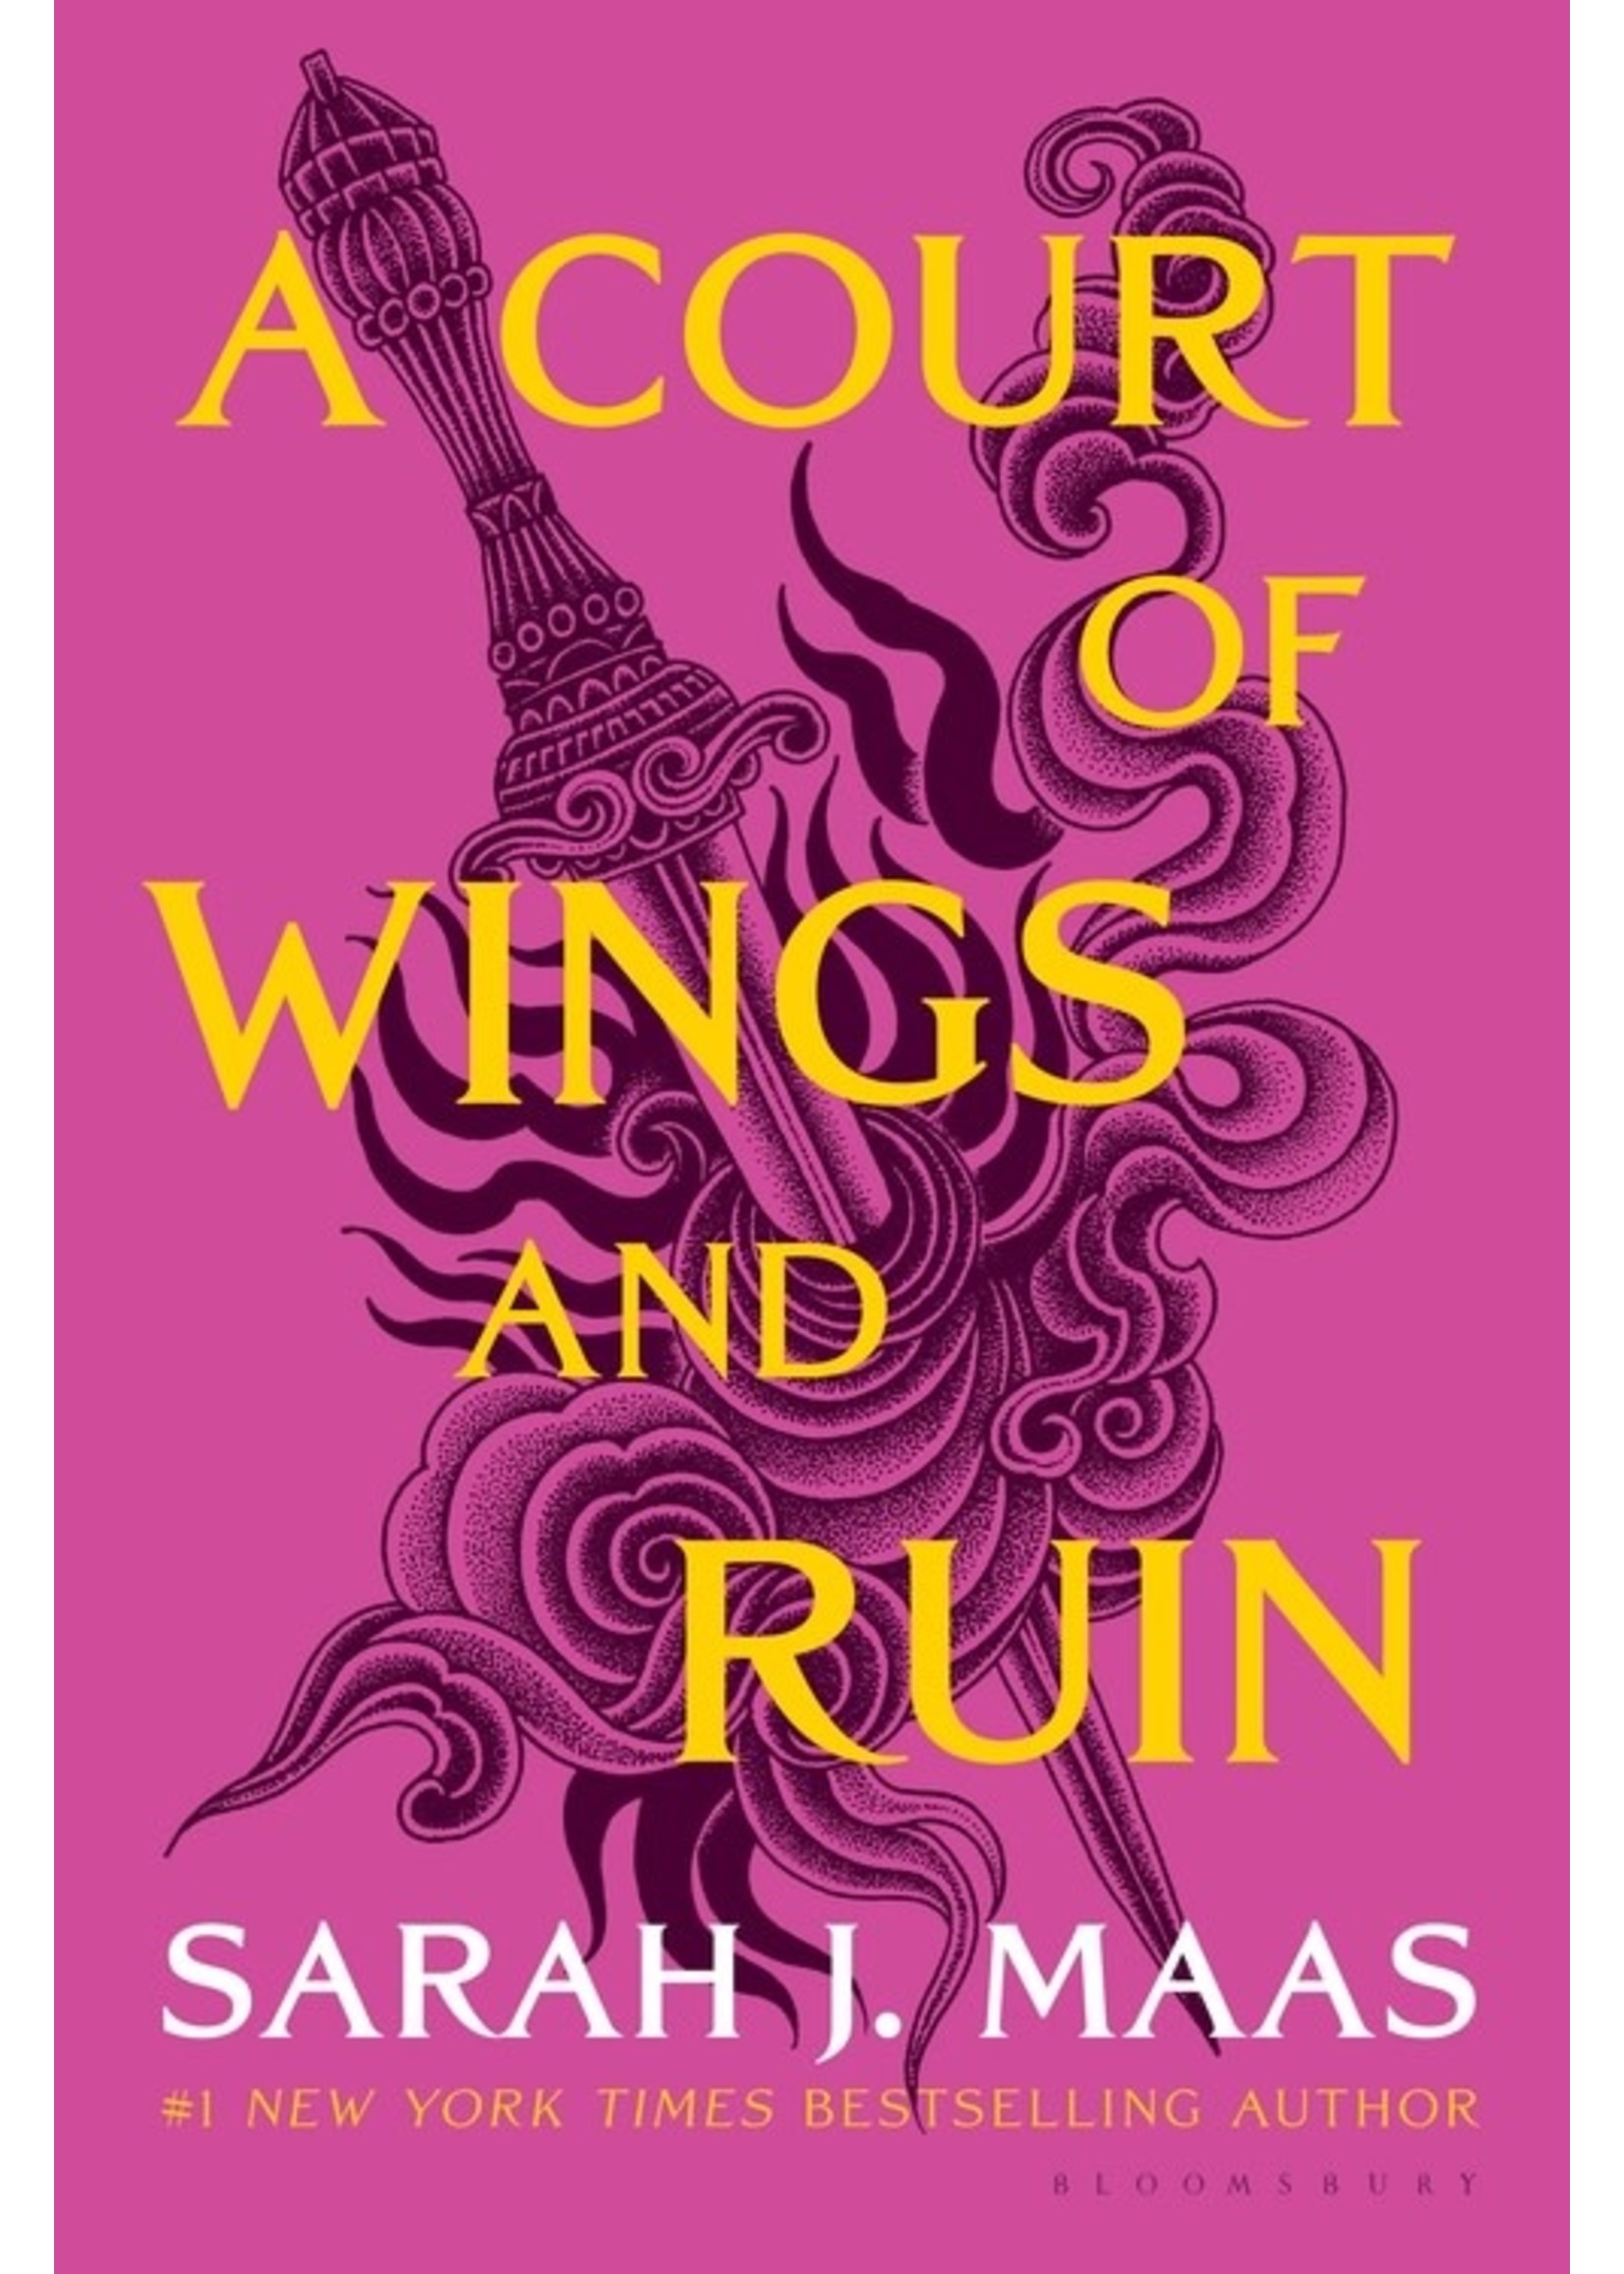 A Court of Wings and Ruin (A Court of Thorns and Roses #3) by Sarah J. Maas